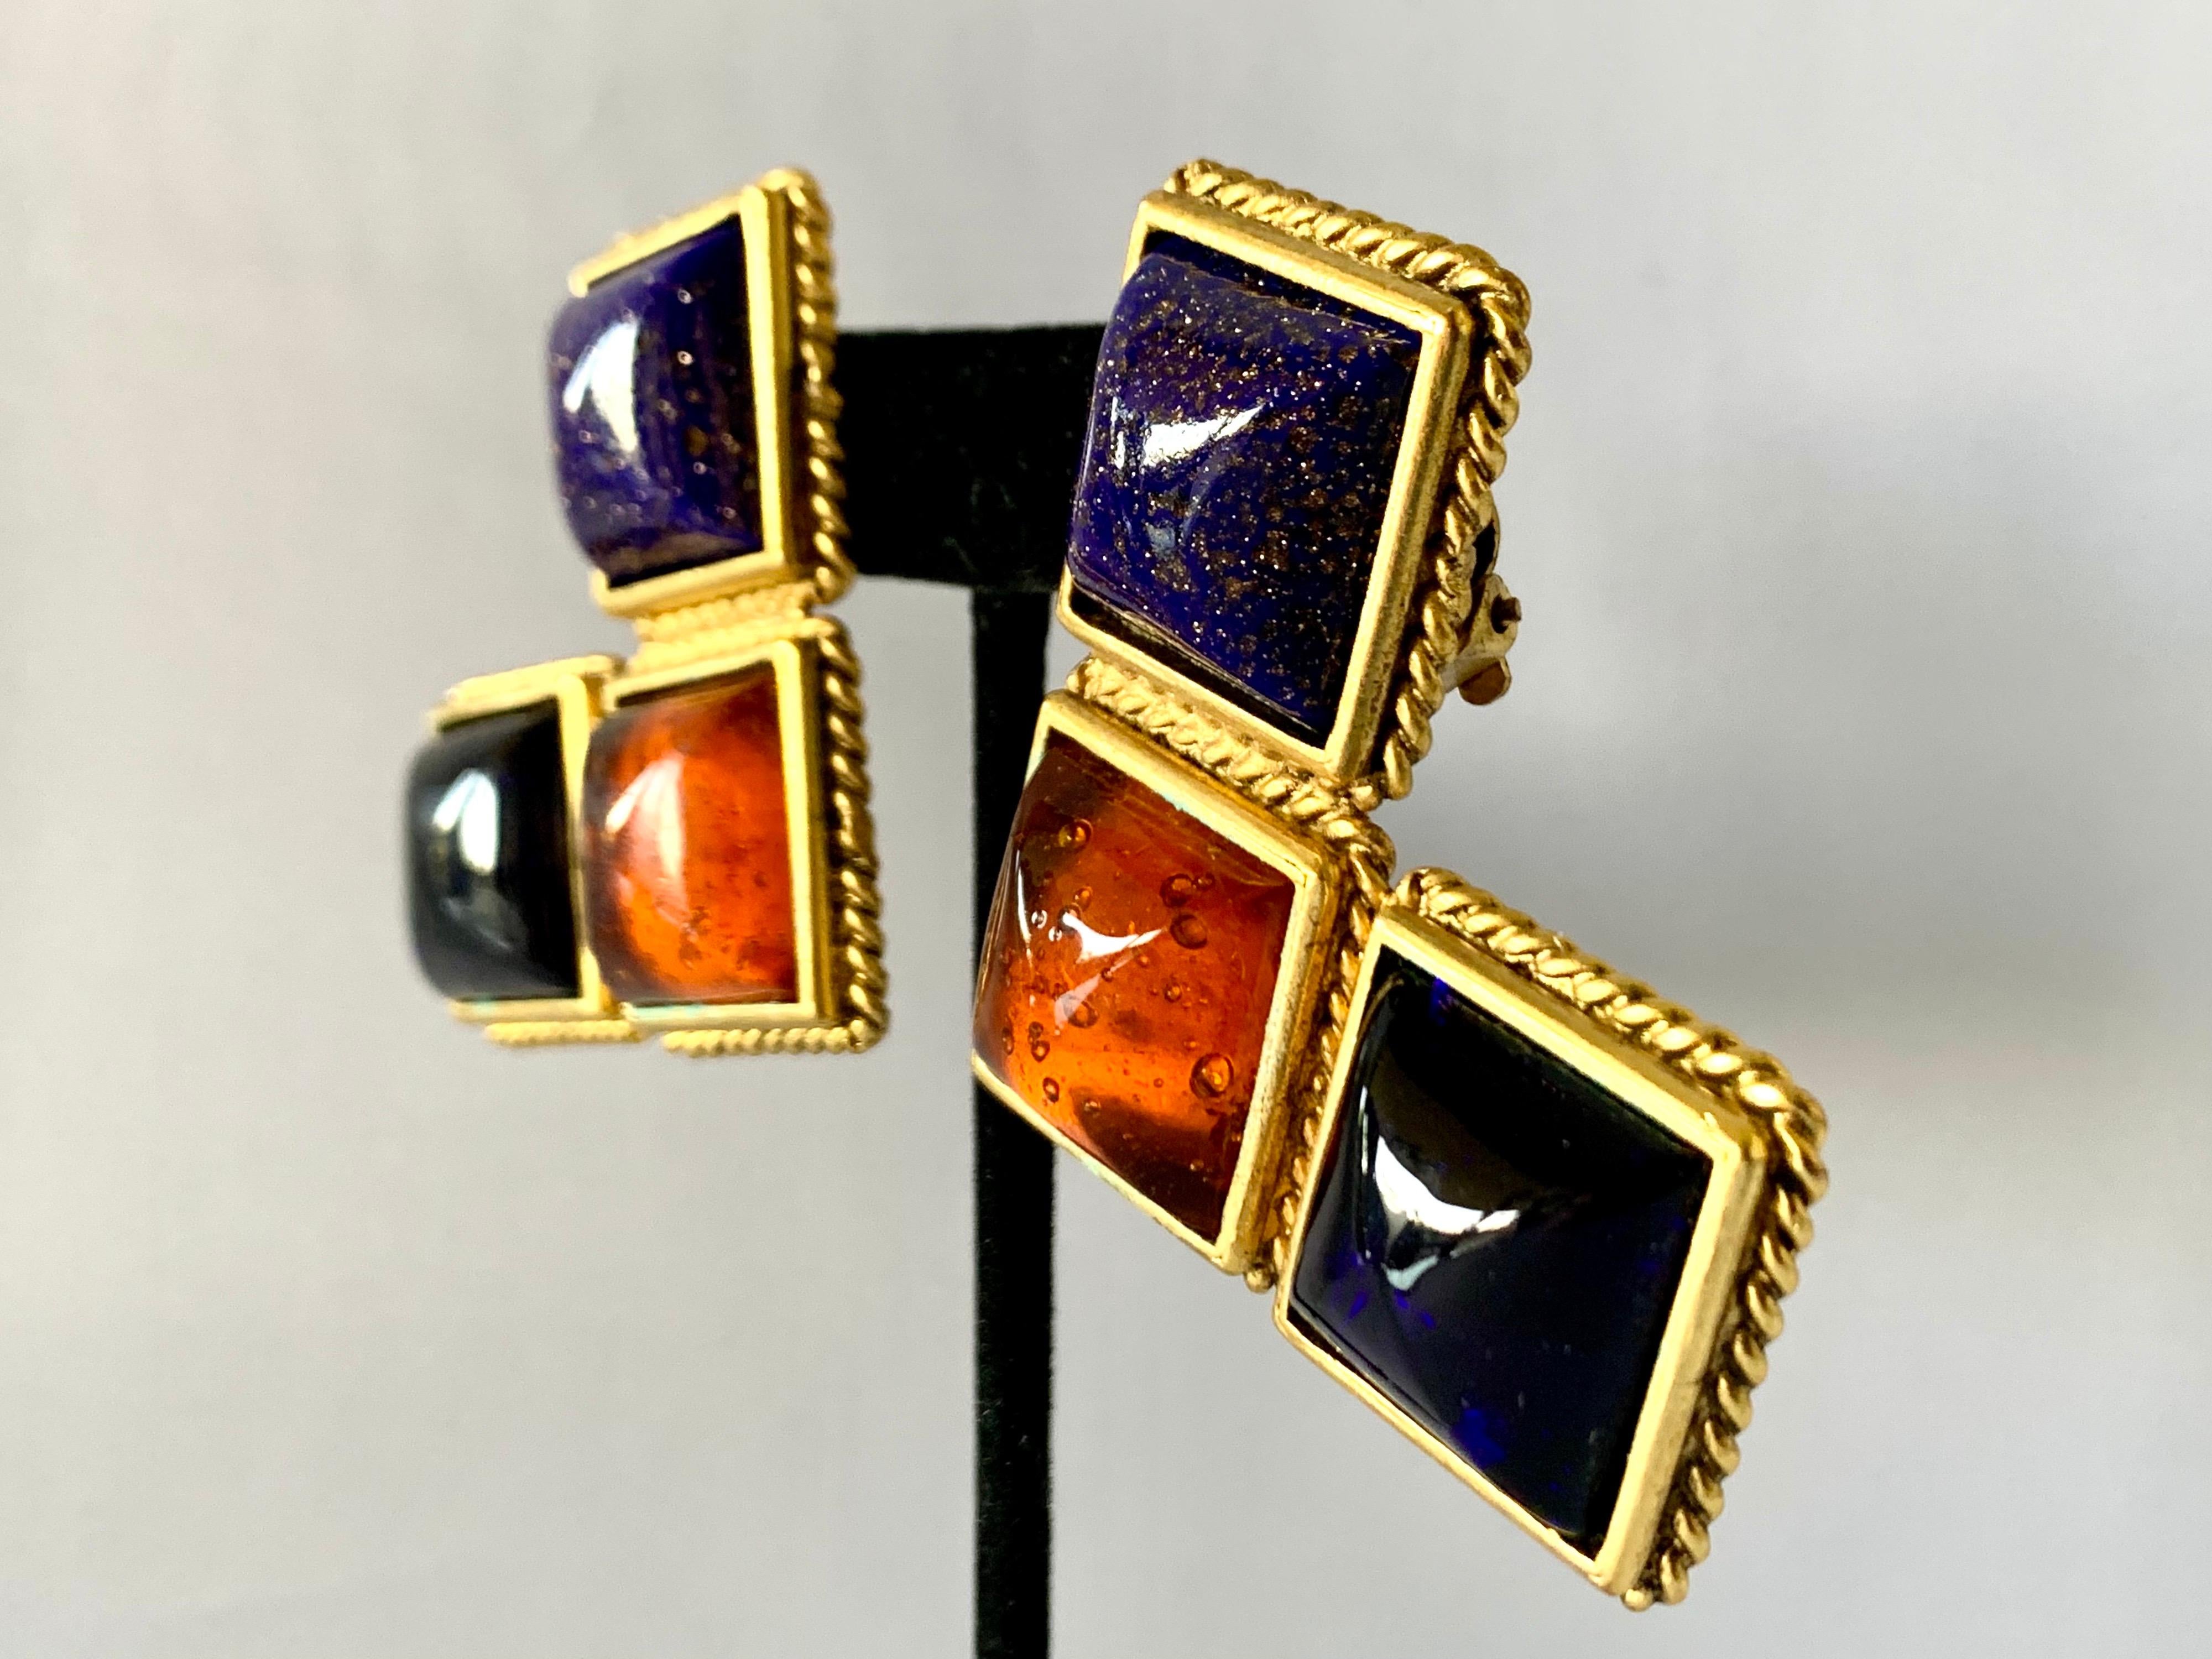 Vintage hard-to-find clip-on statement earrings by Isabel Canovas - comprised out of gilt metal 